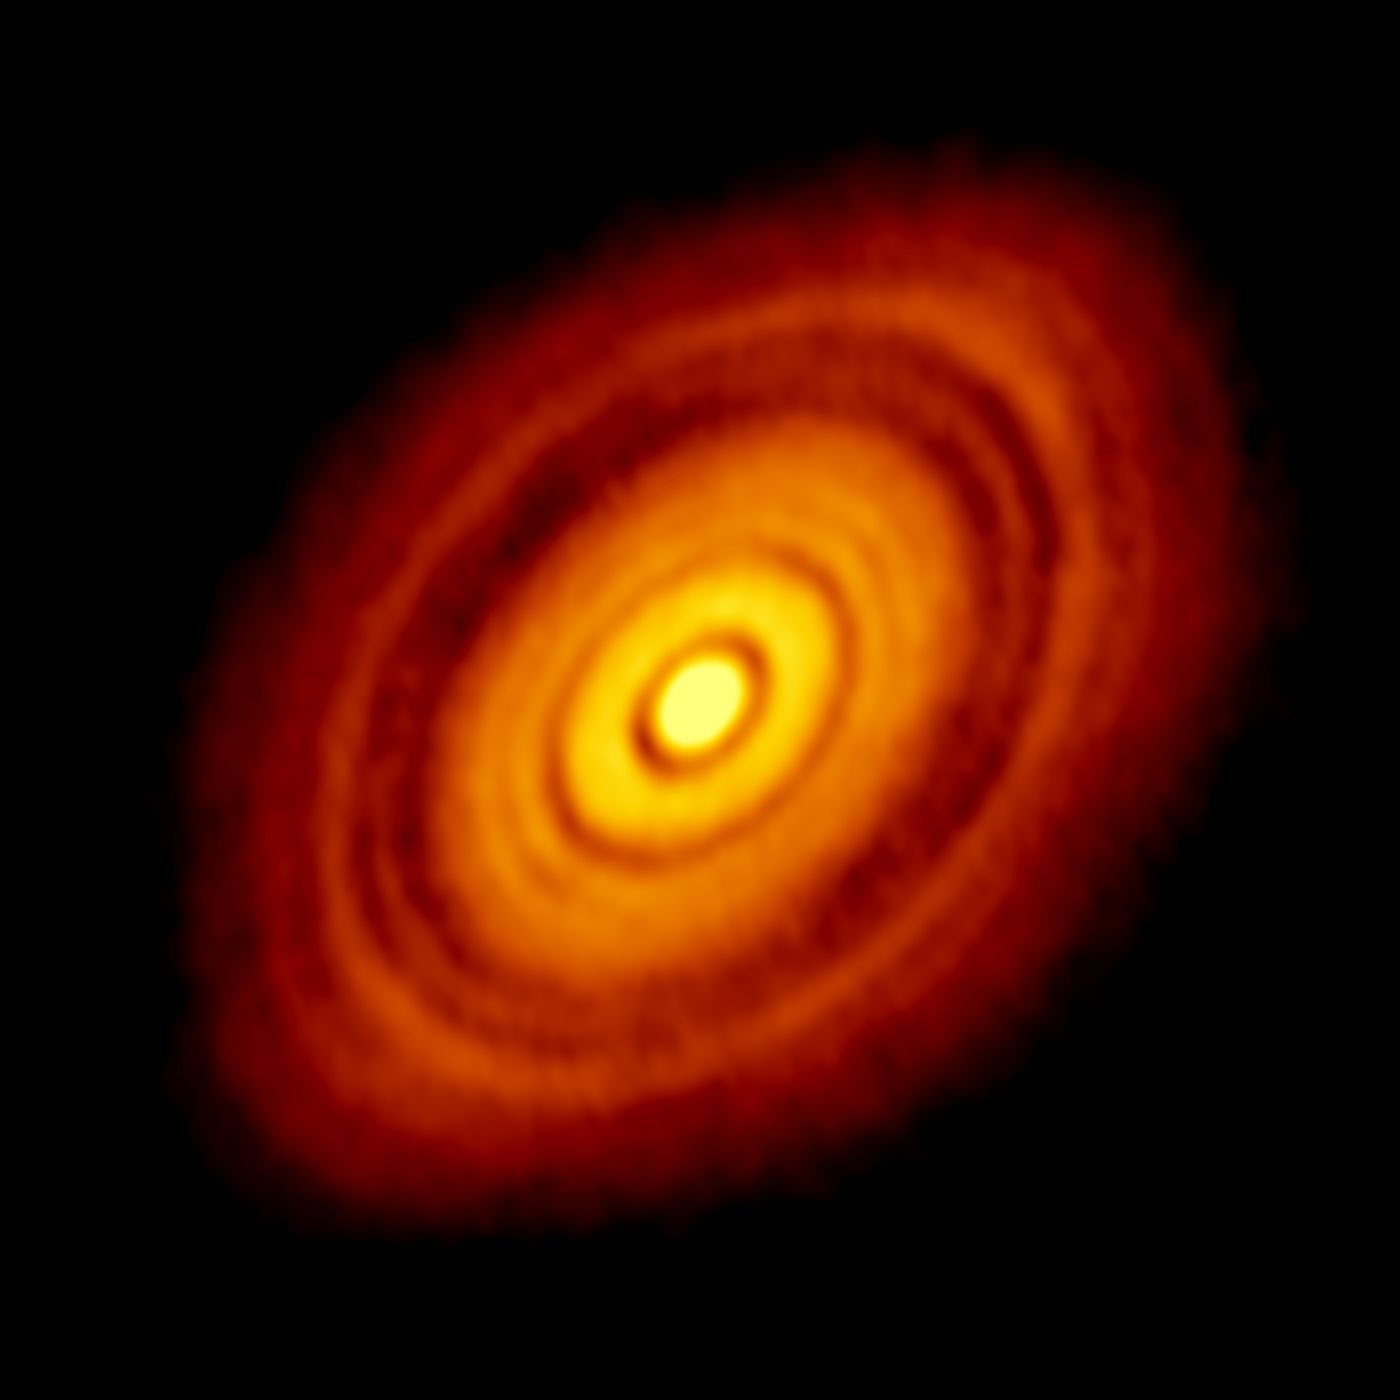 This is an image of the young star HL Tau and its protoplanetary disk, captured by ALMA. Credit: ALMA (ESO/NAOJ/NRAO); C. Brogan, B. Saxton (NRAO/AUI/NSF)